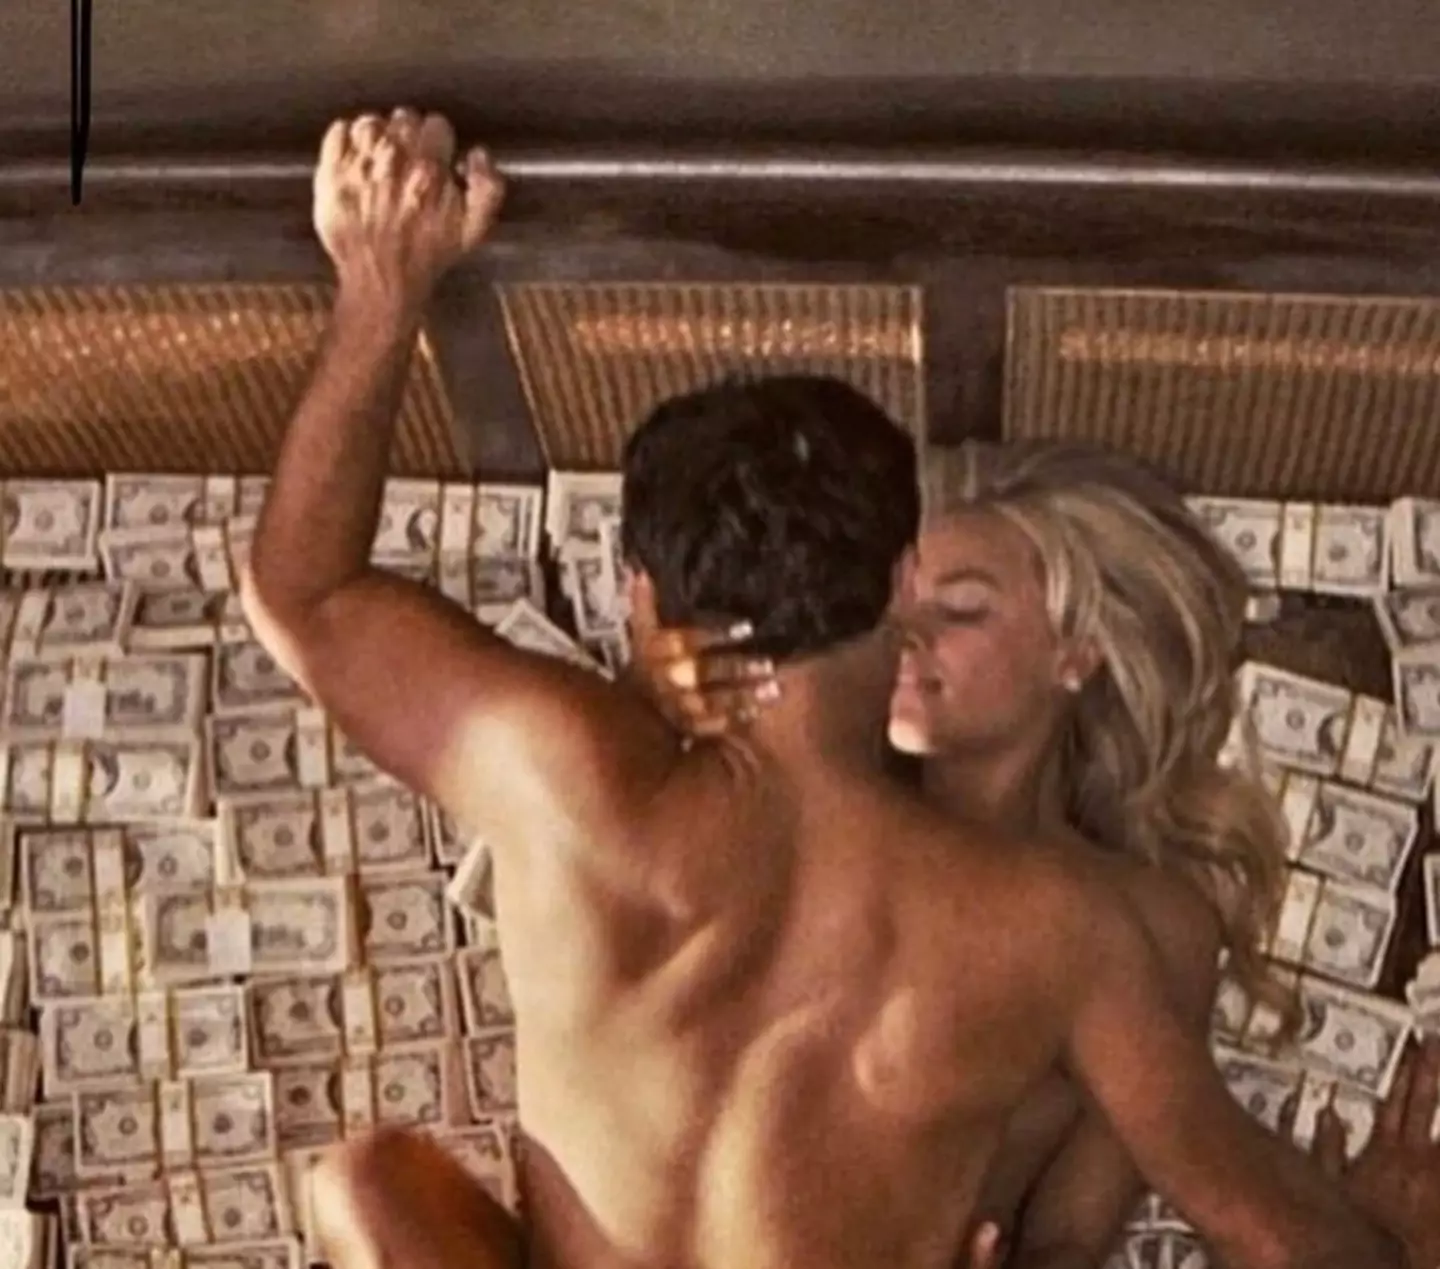 The infamous scene involving Margot Robbie, Leonardo DiCaprio, a bed and a lot of fake cash.